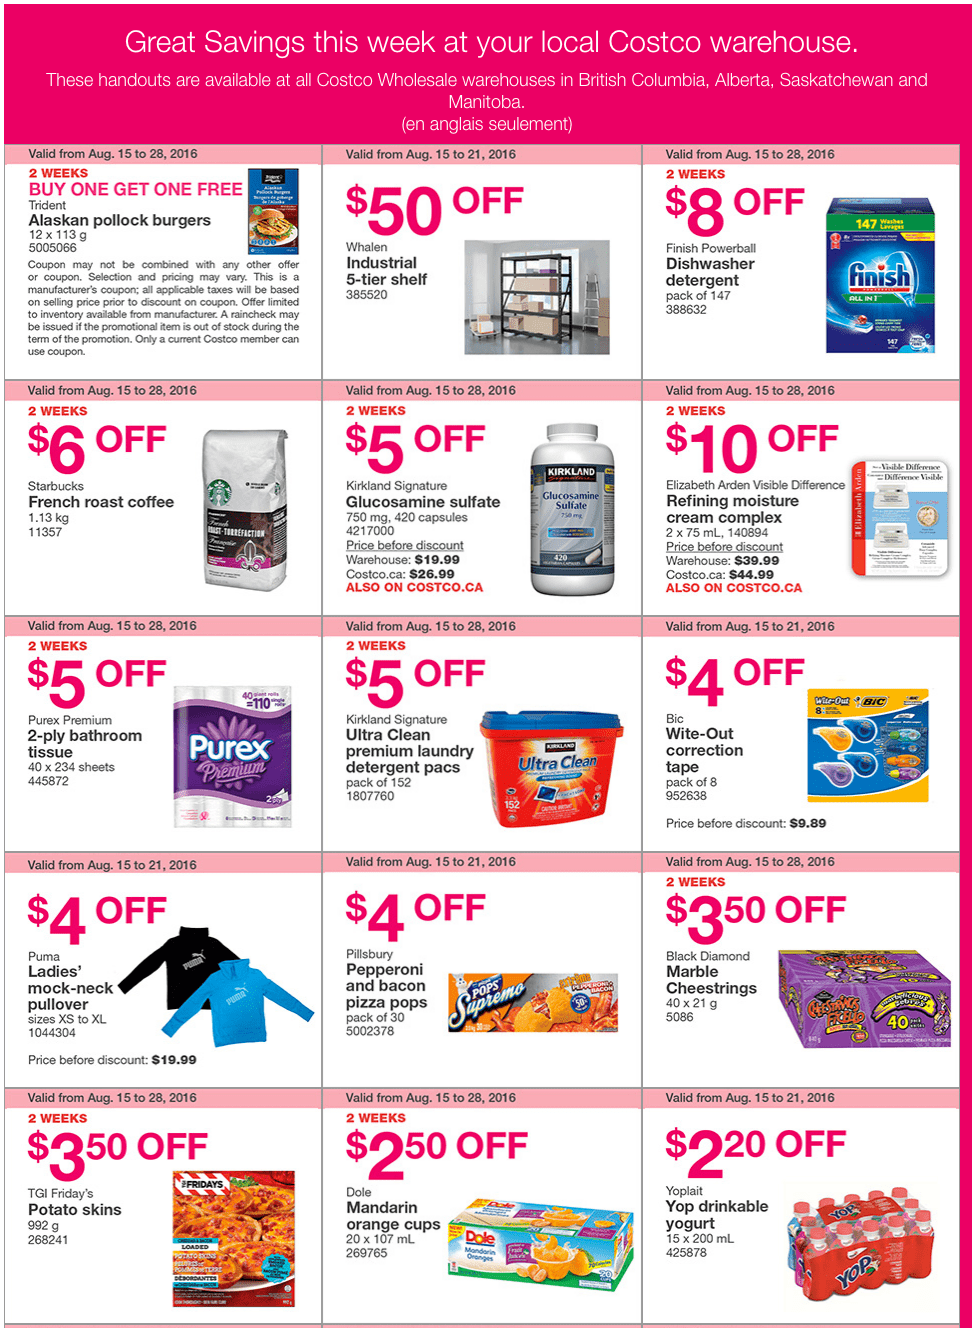 Costco Canada Weekly Instant Handouts Coupons/Flyers For Western